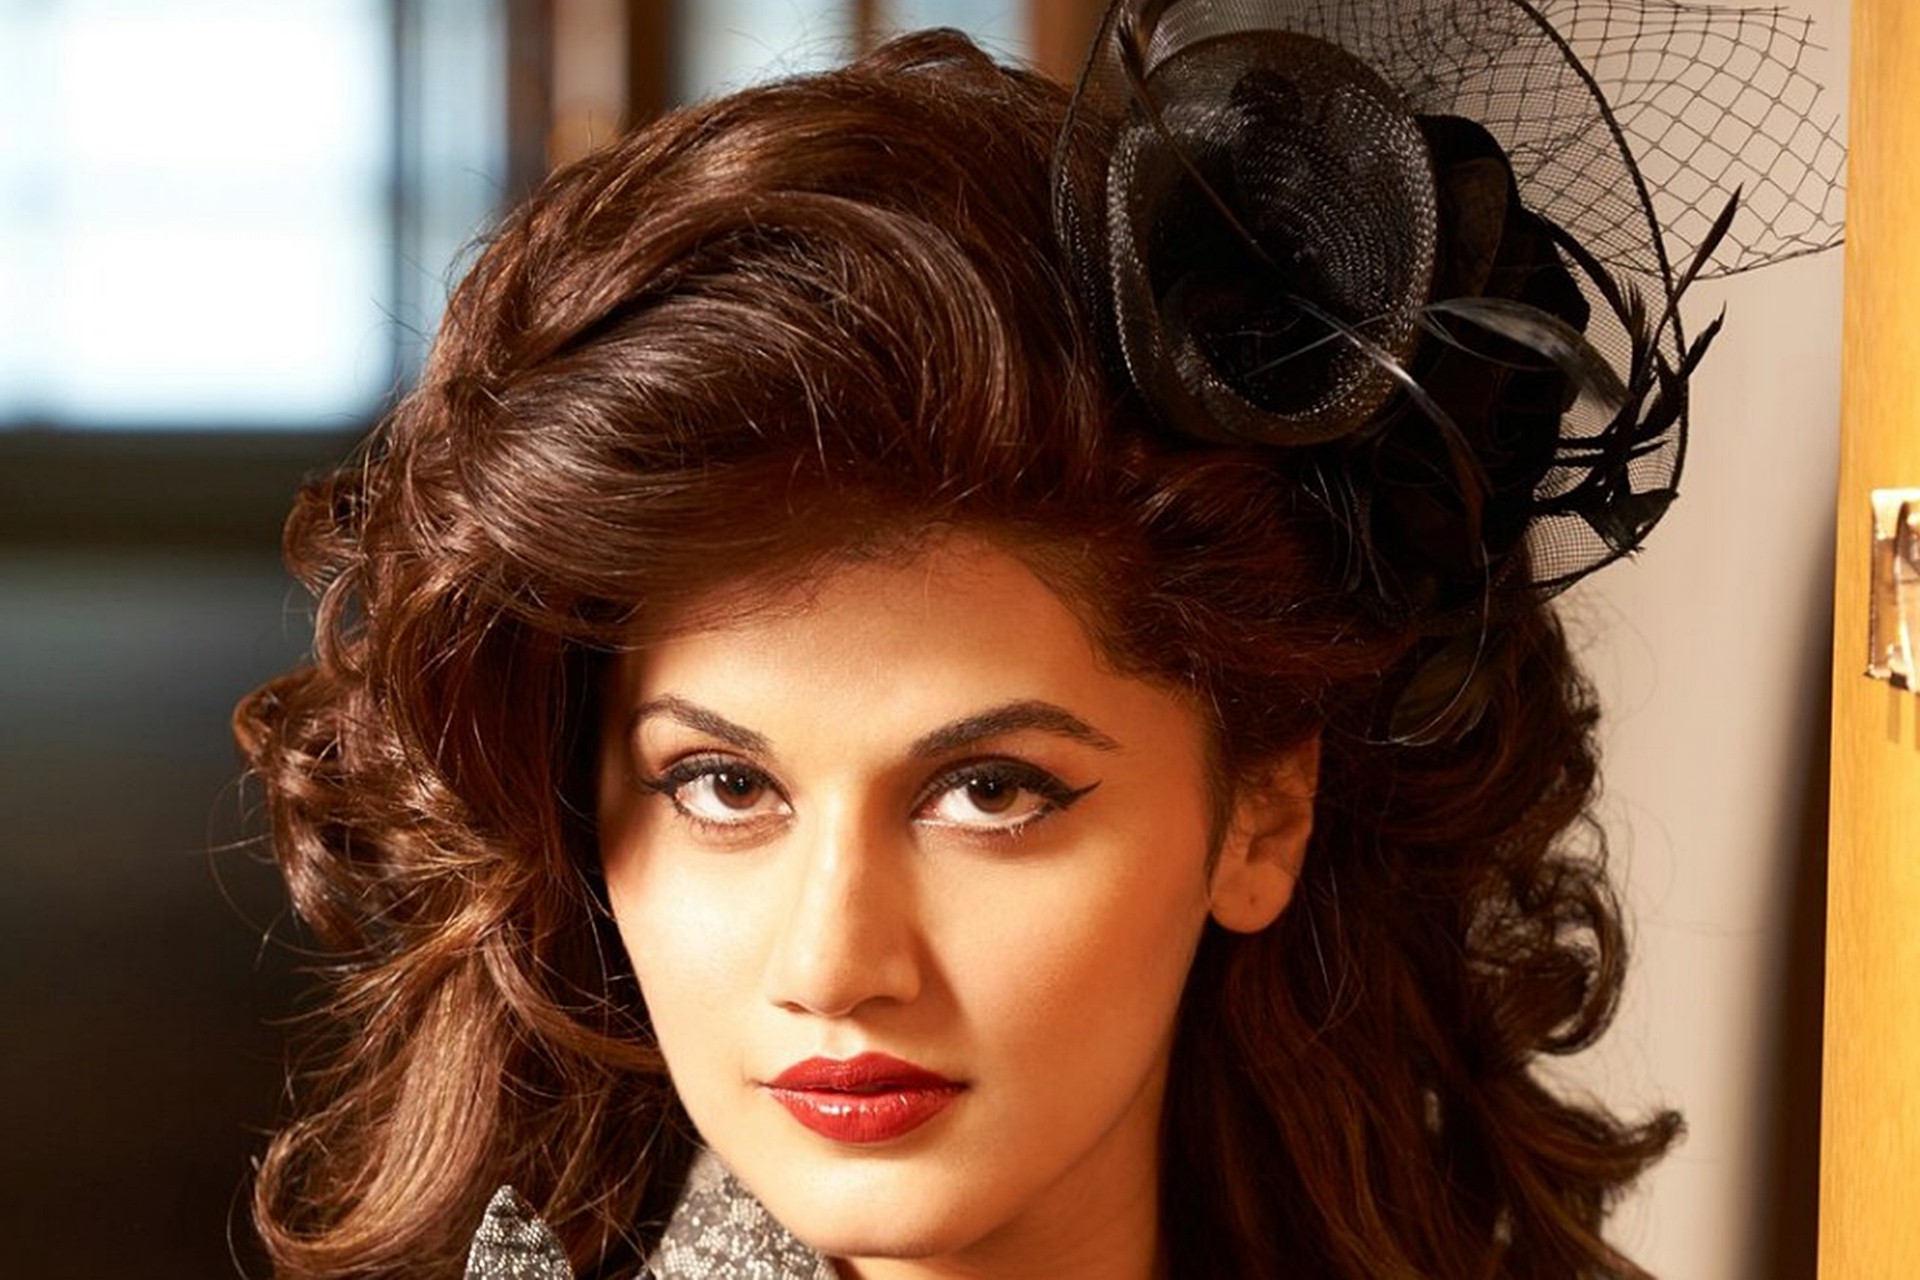 taapsee_pannu_wall_971530